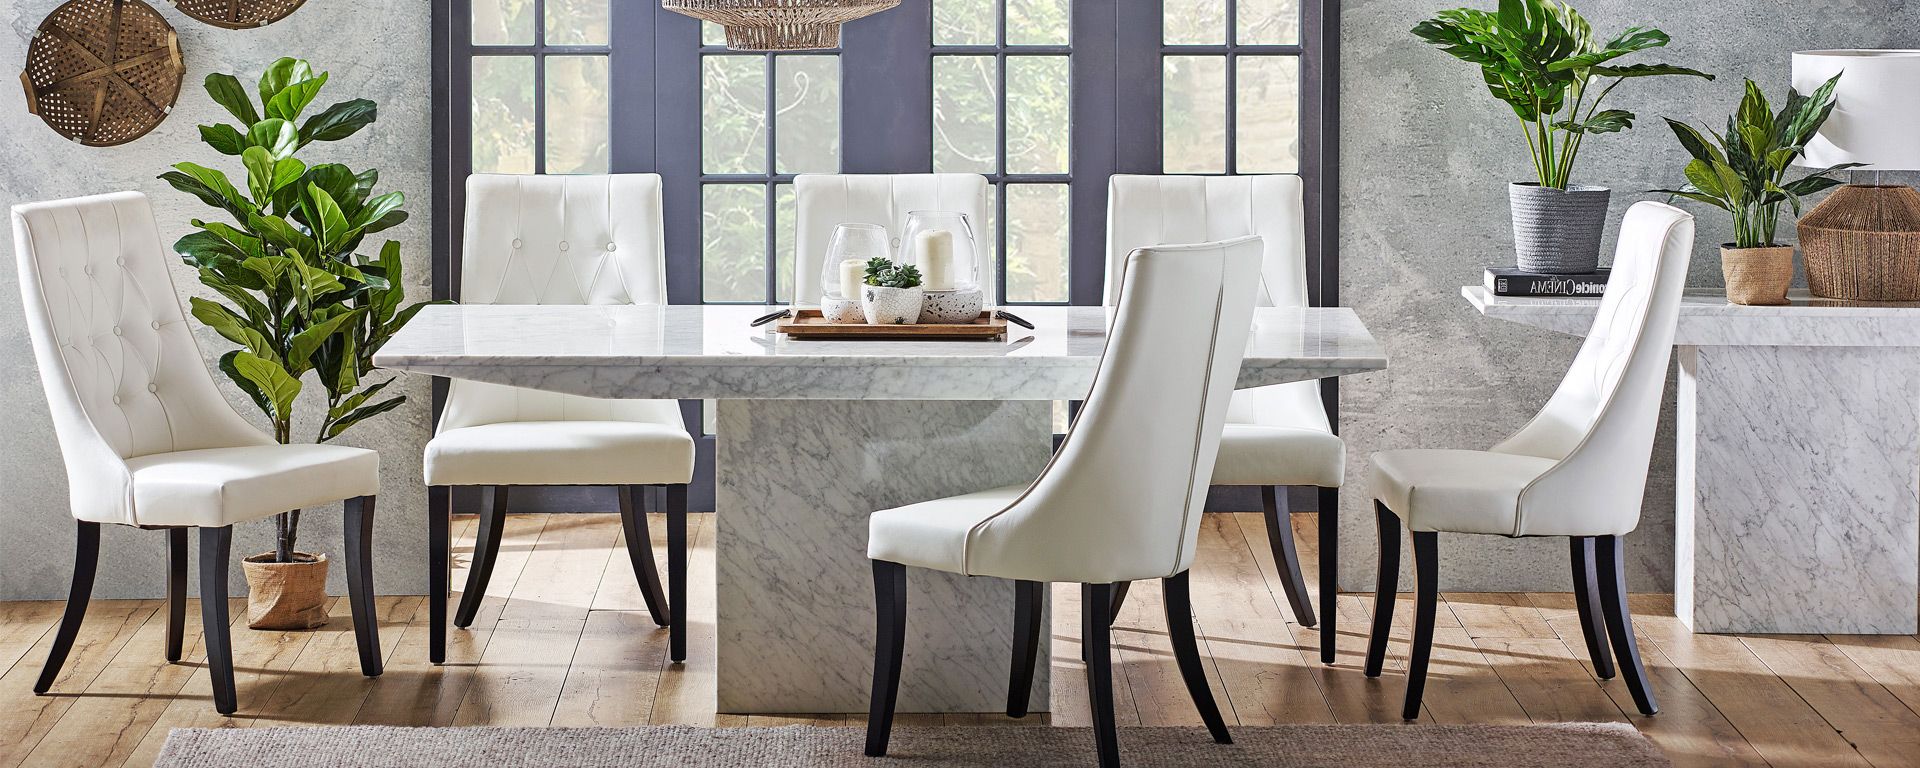 Trendy Christie Round Marble Dining Tables Pertaining To Dining Room Goals: 5 Trending Concrete And Stone Dining (View 12 of 25)